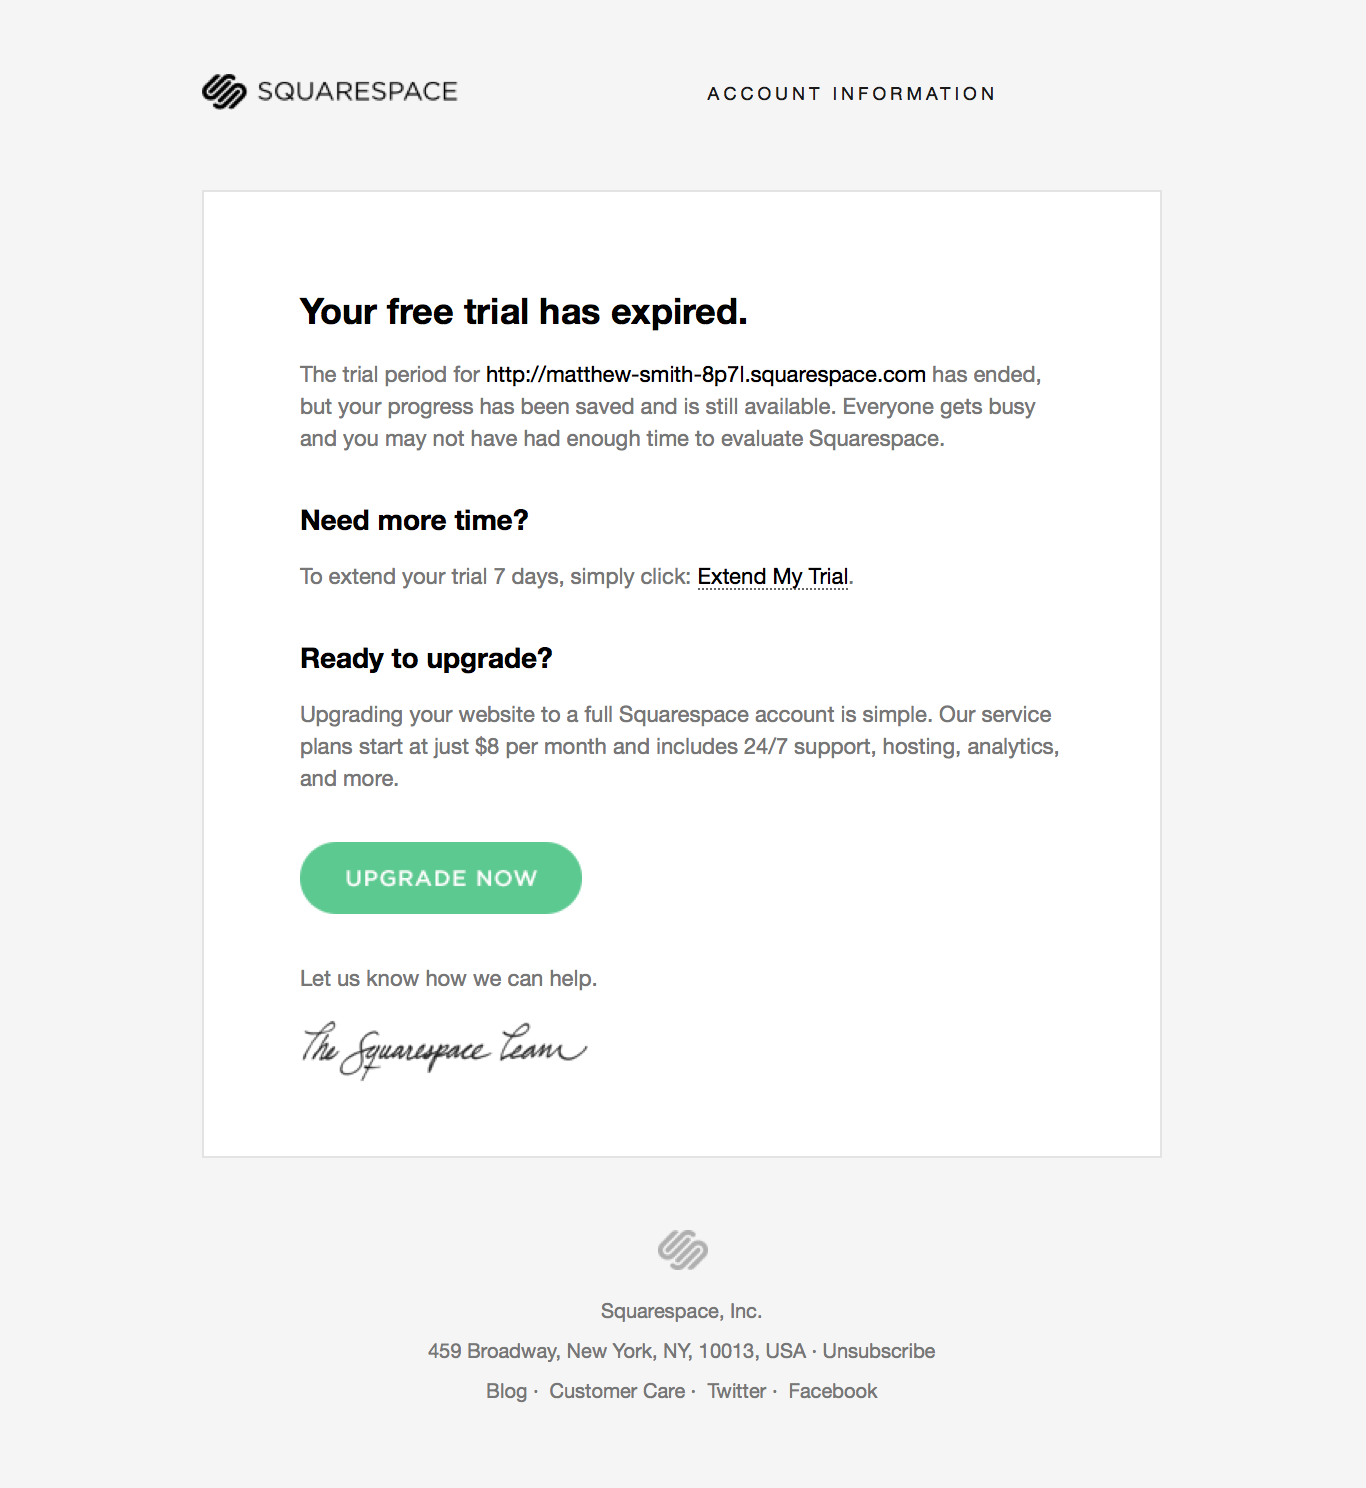 Squarespace email